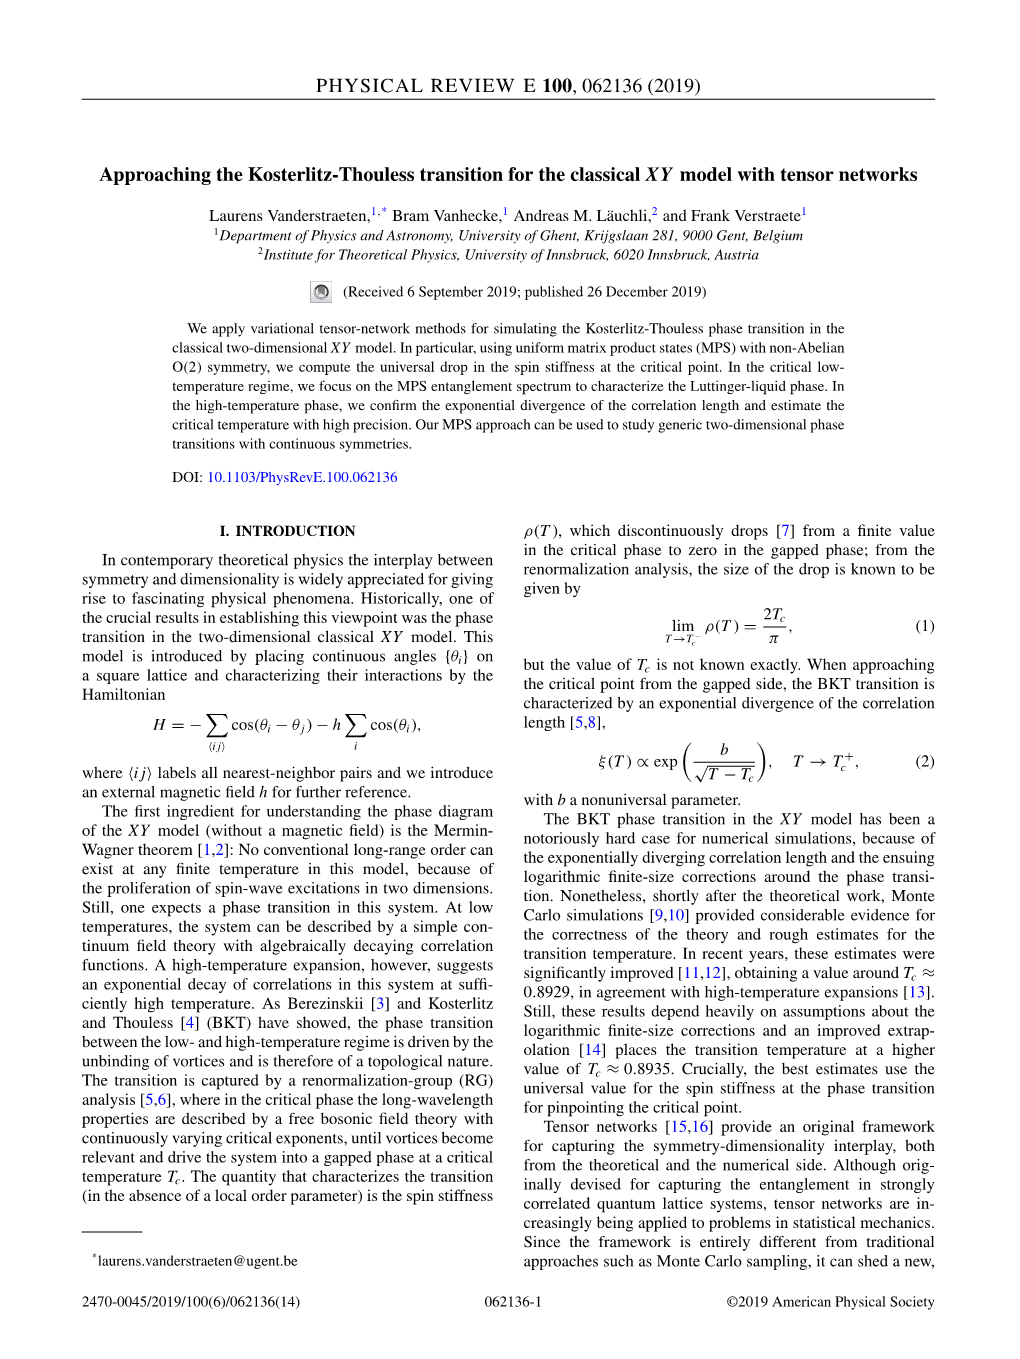 Approaching the Kosterlitz-Thouless Transition for the Classical XY Model with Tensor Networks